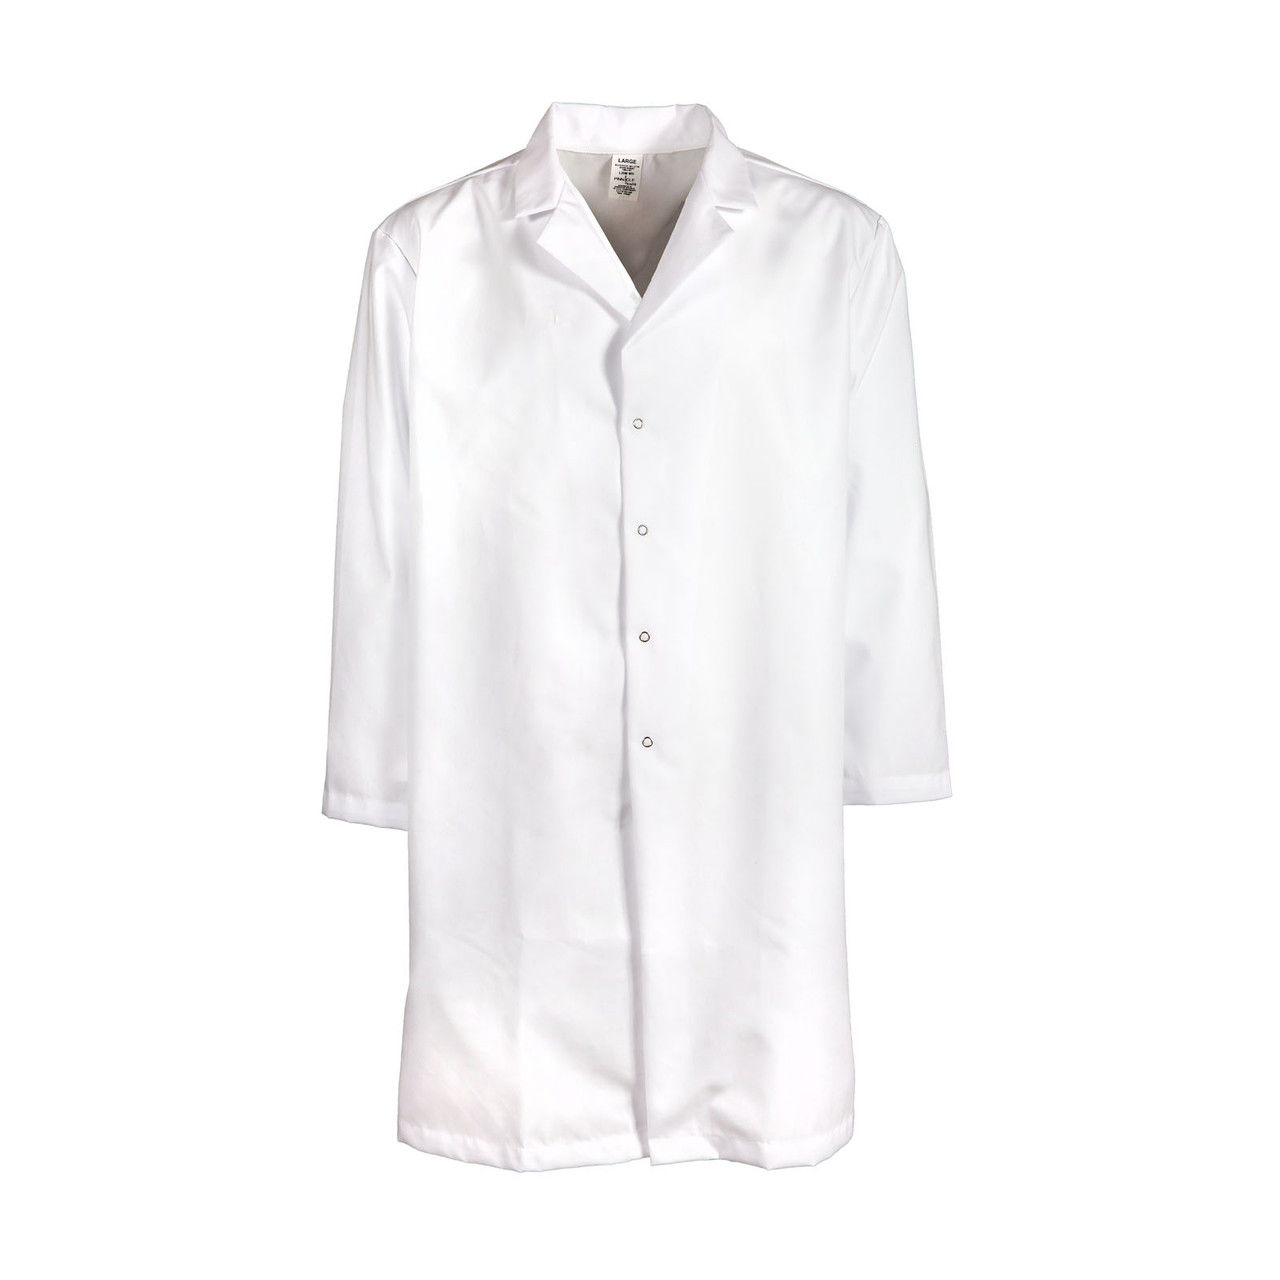 What material is the Men's No Pocket Lab Coat made of?